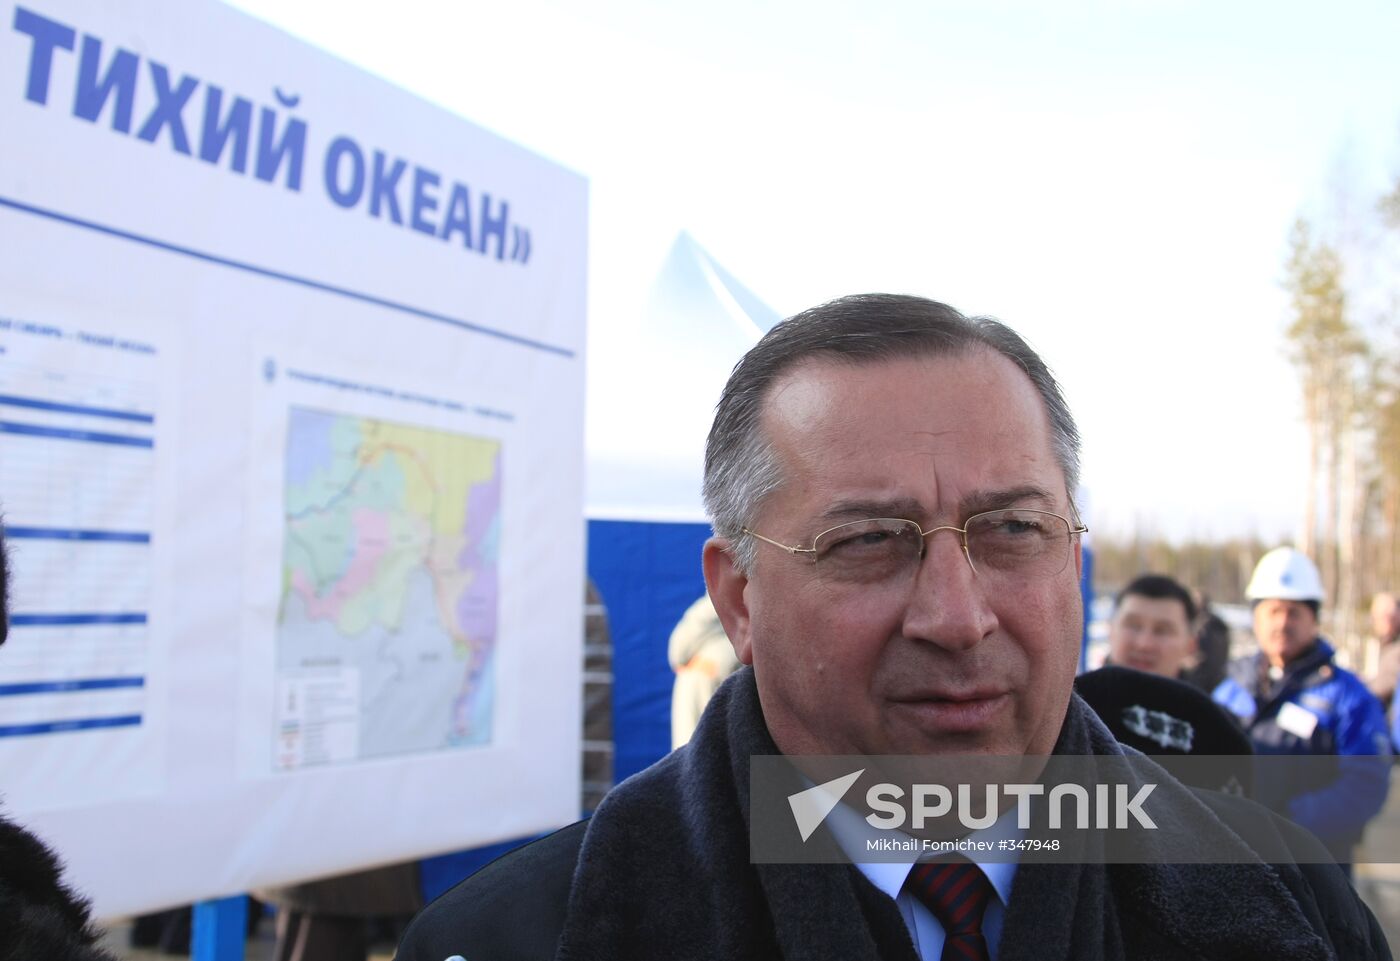 Section of ESPO pipeline launched in Yakutia